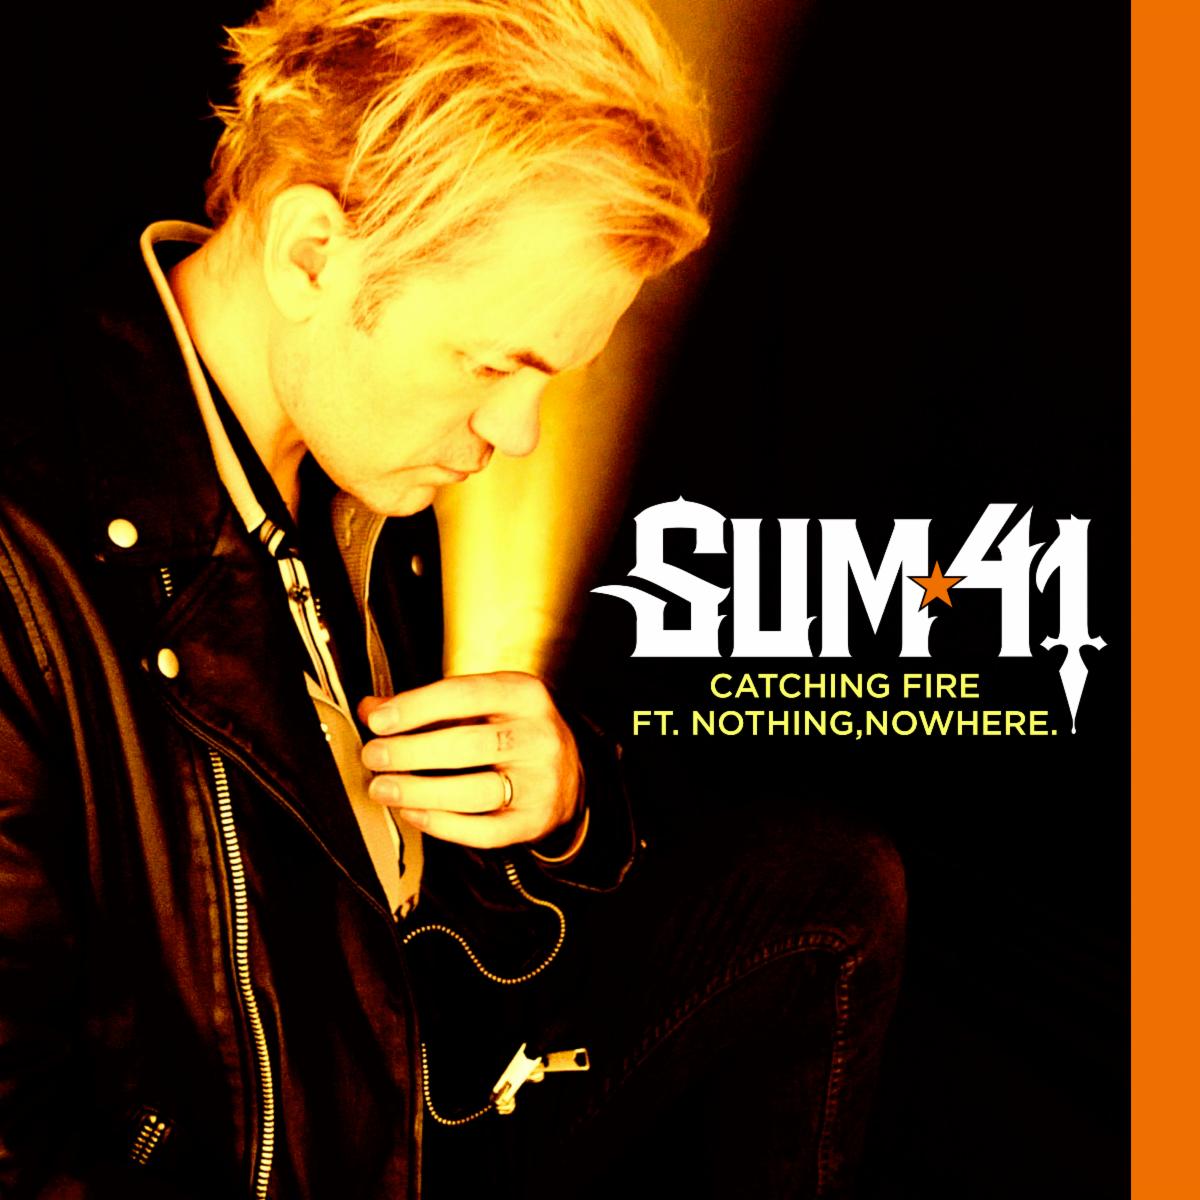 Deryck Whibley of Sum 41 releases “Catching Fire feat. nothing,nowhere” after healing from wife’s suicide attempt